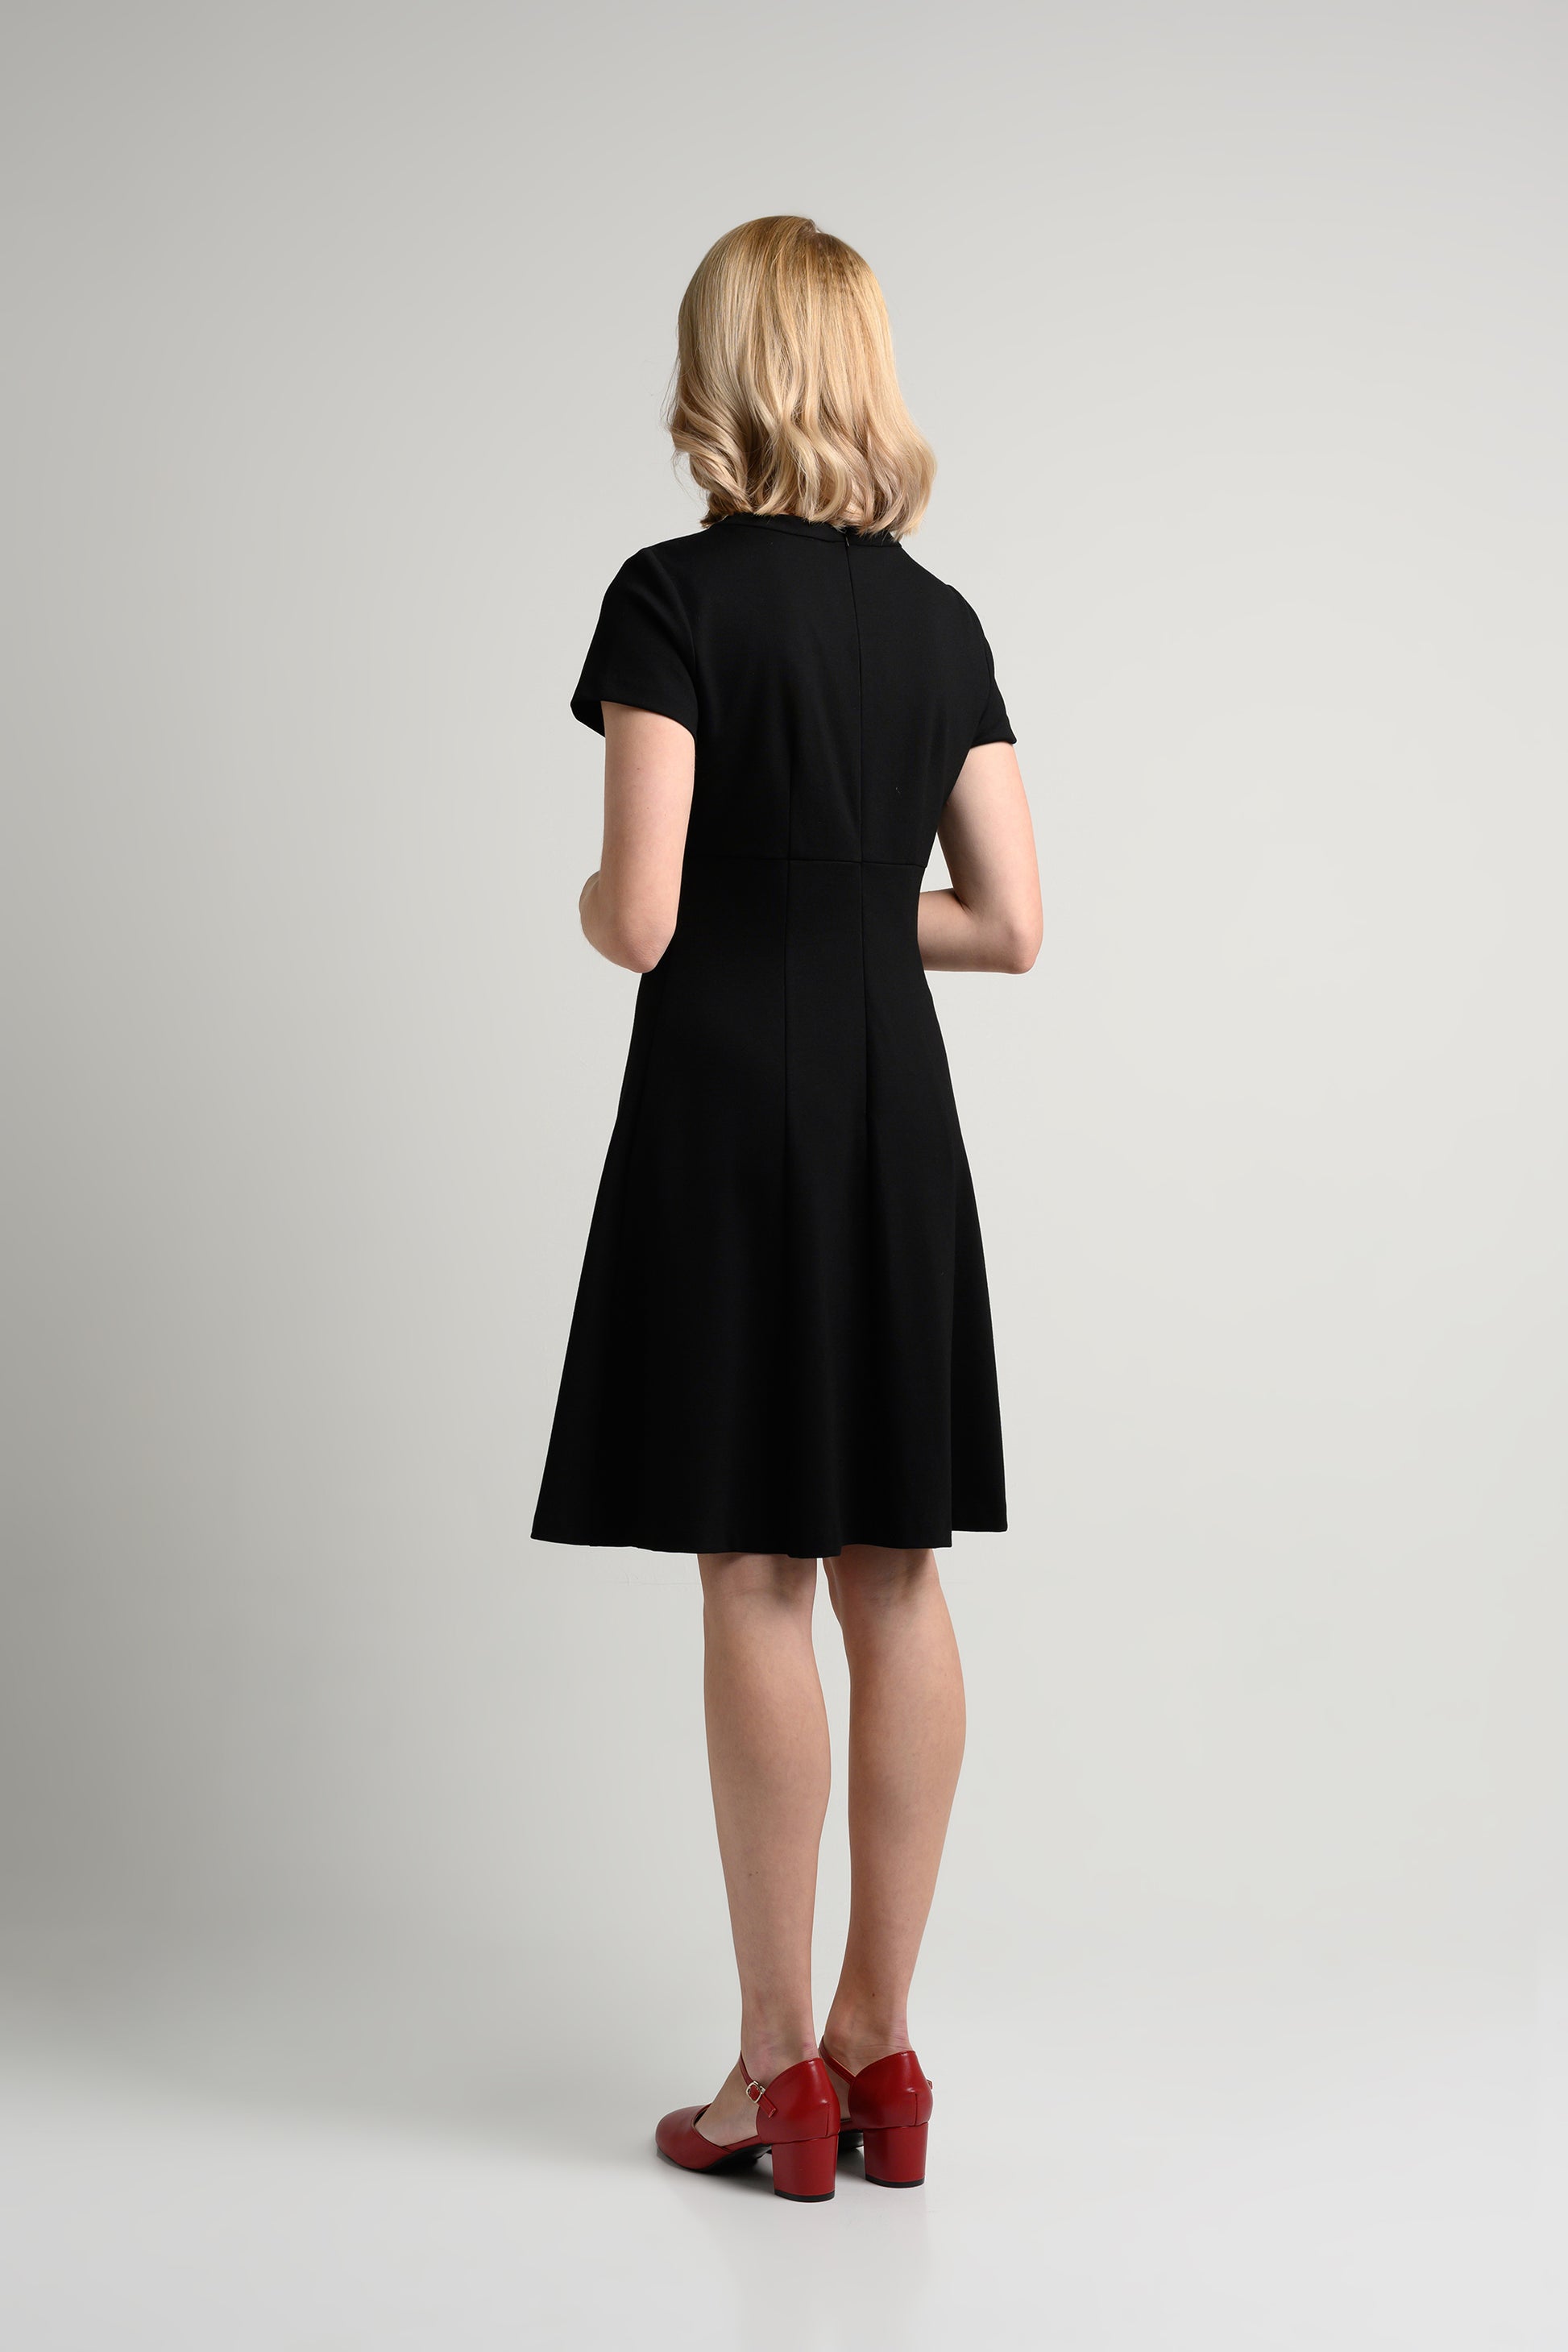 Rosylee Keyhole Fit And Flare Dress - Black 4